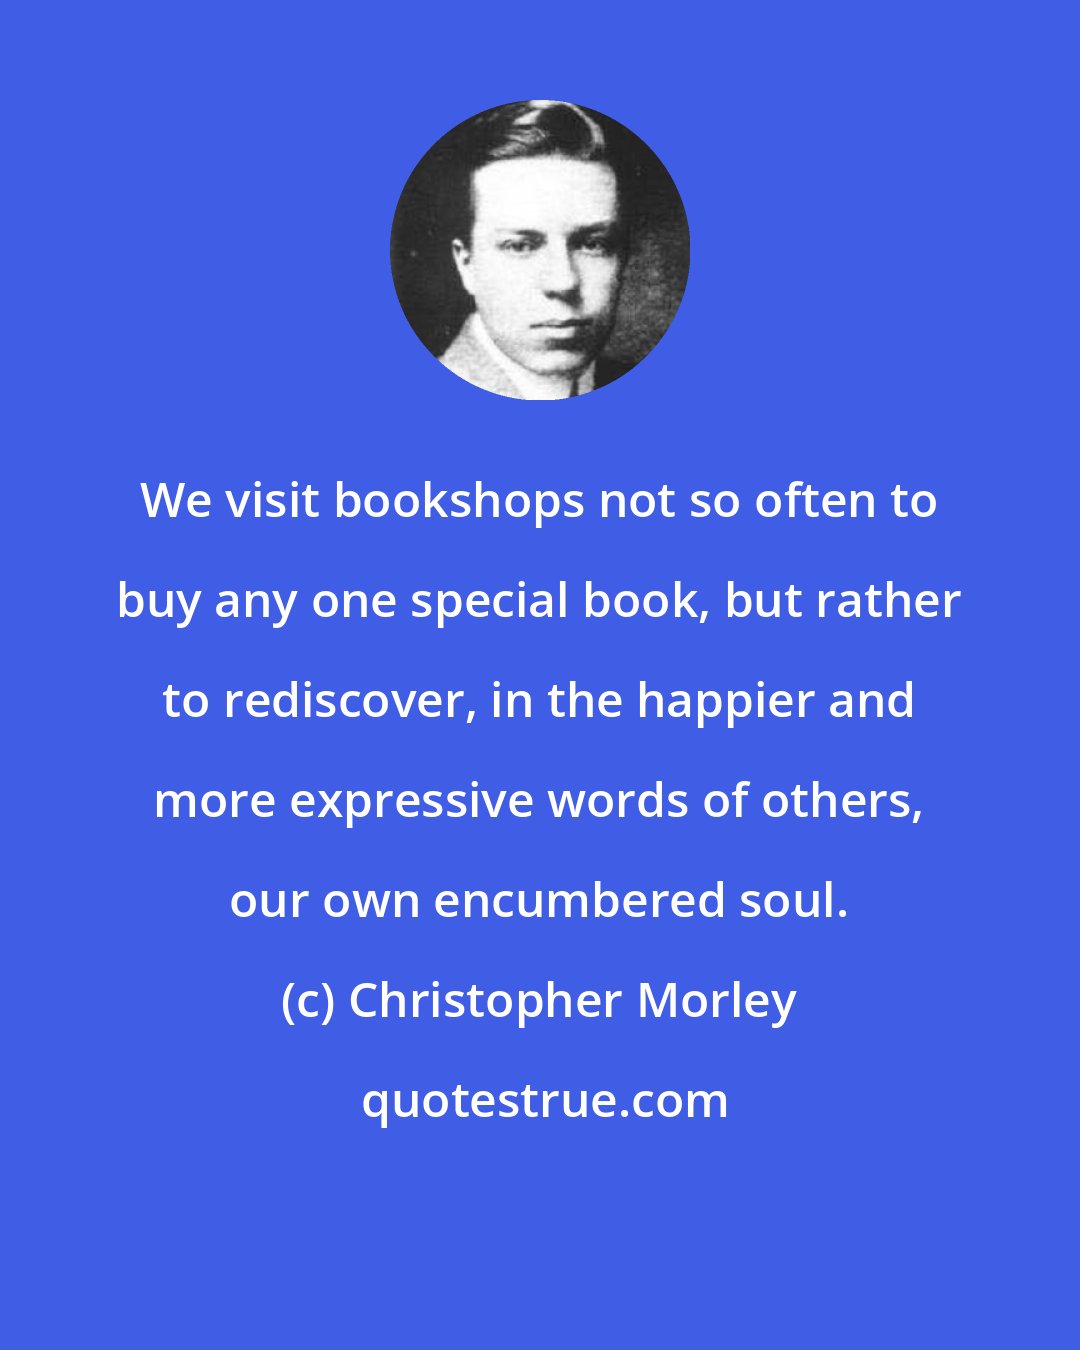 Christopher Morley: We visit bookshops not so often to buy any one special book, but rather to rediscover, in the happier and more expressive words of others, our own encumbered soul.